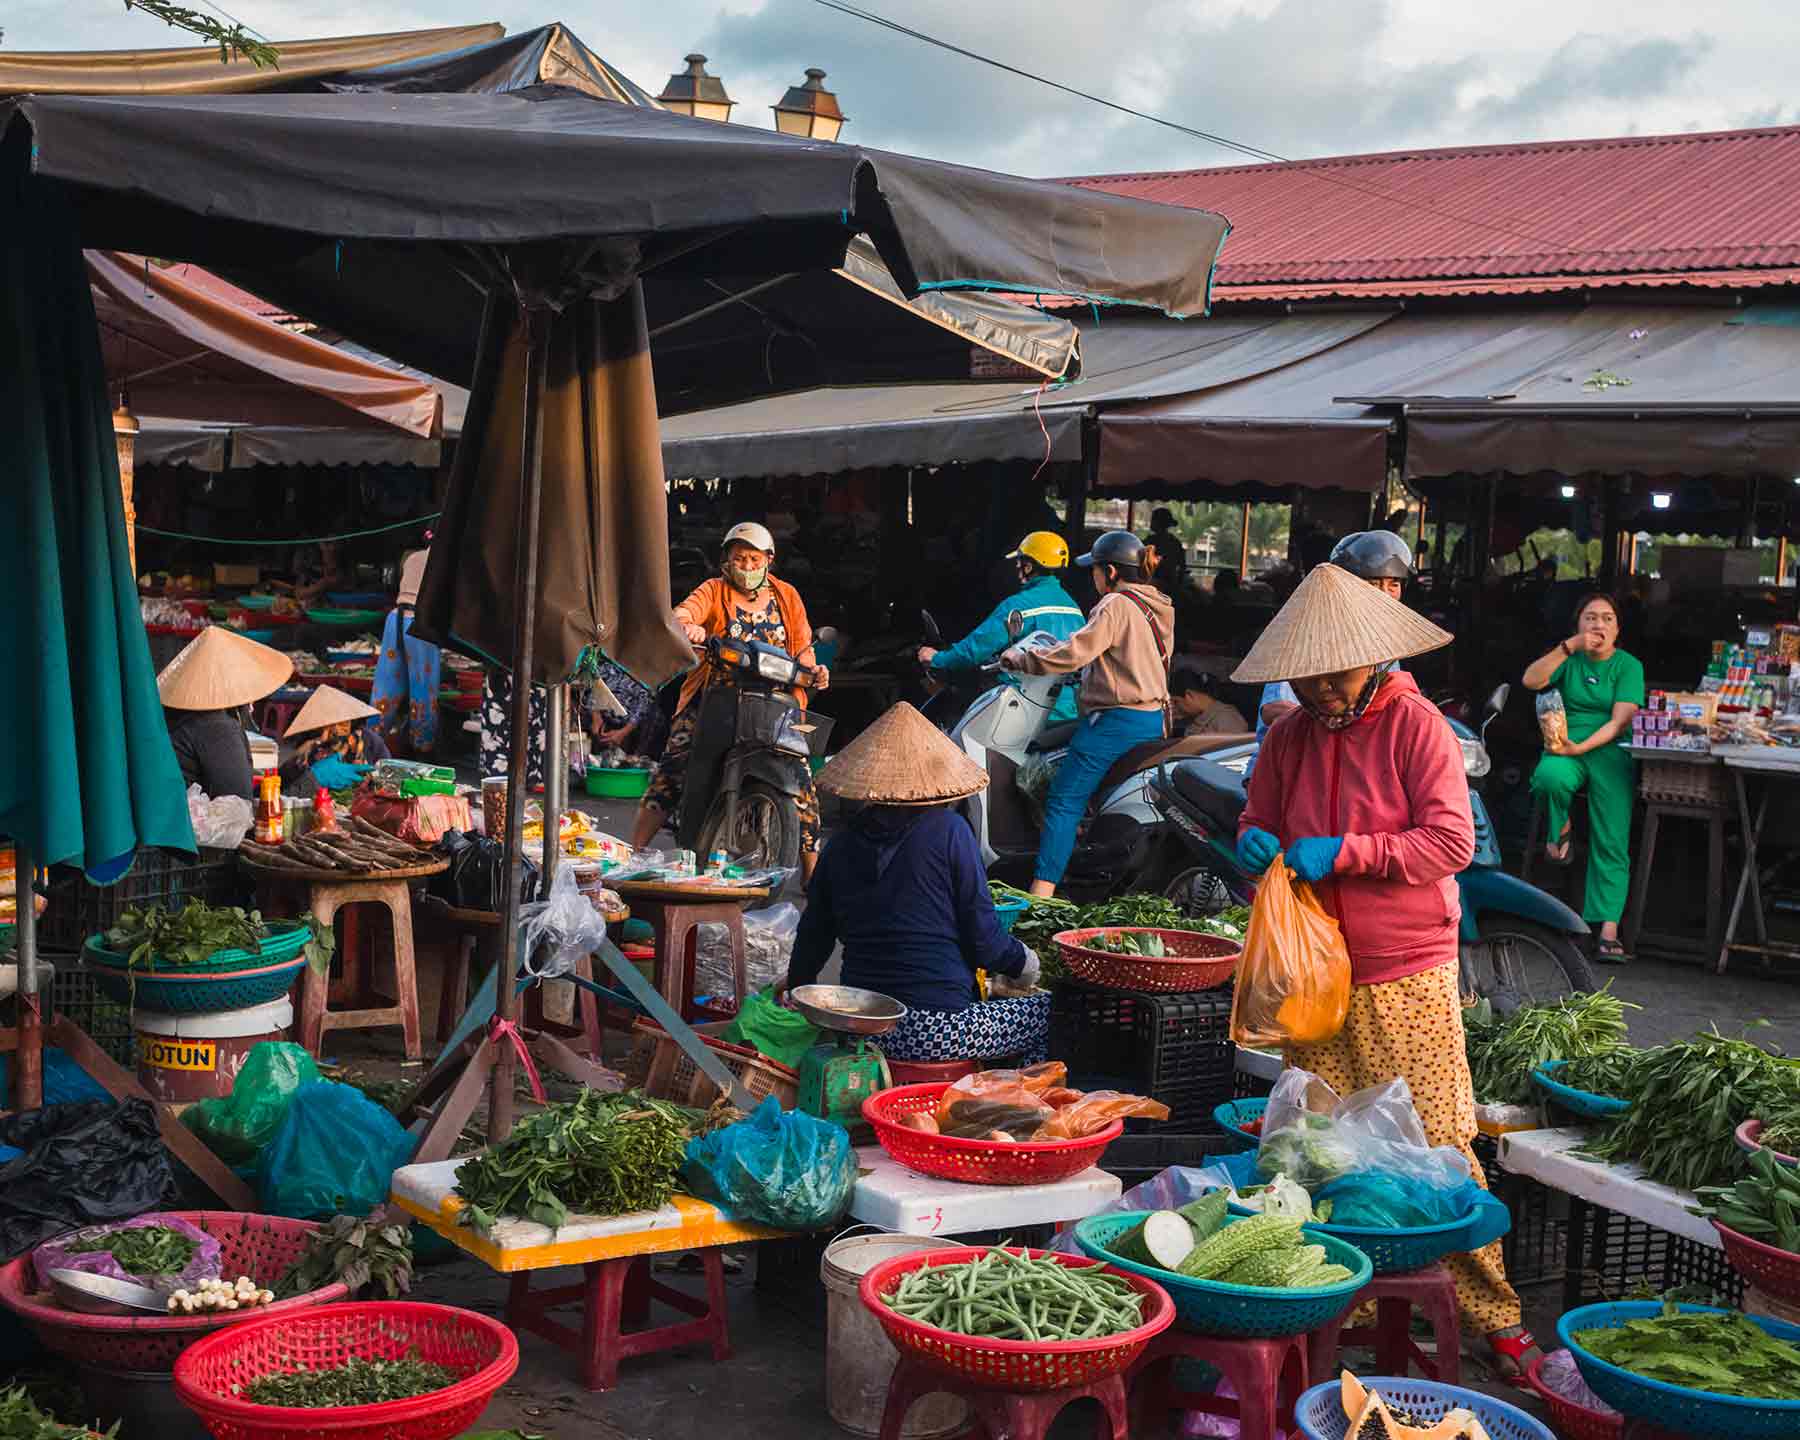 Bustling Hoi An Vietnam market with fresh produce and traditional architecture.